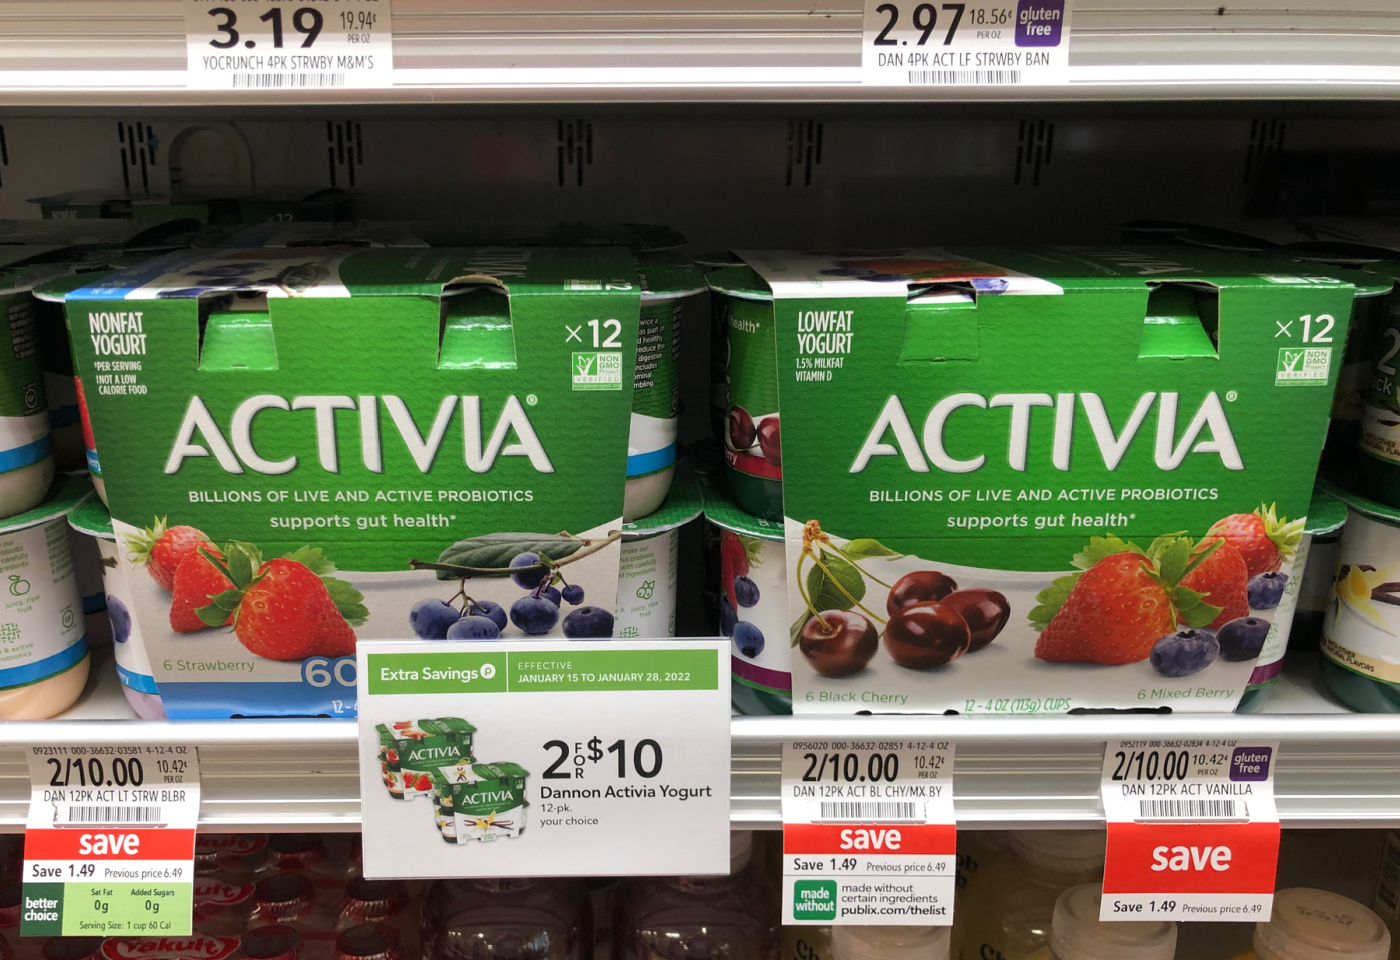 Keep Earning Publix Gift Cards With The Crave & Save Program - Great Deal On Activia This Week At Publix on I Heart Publix